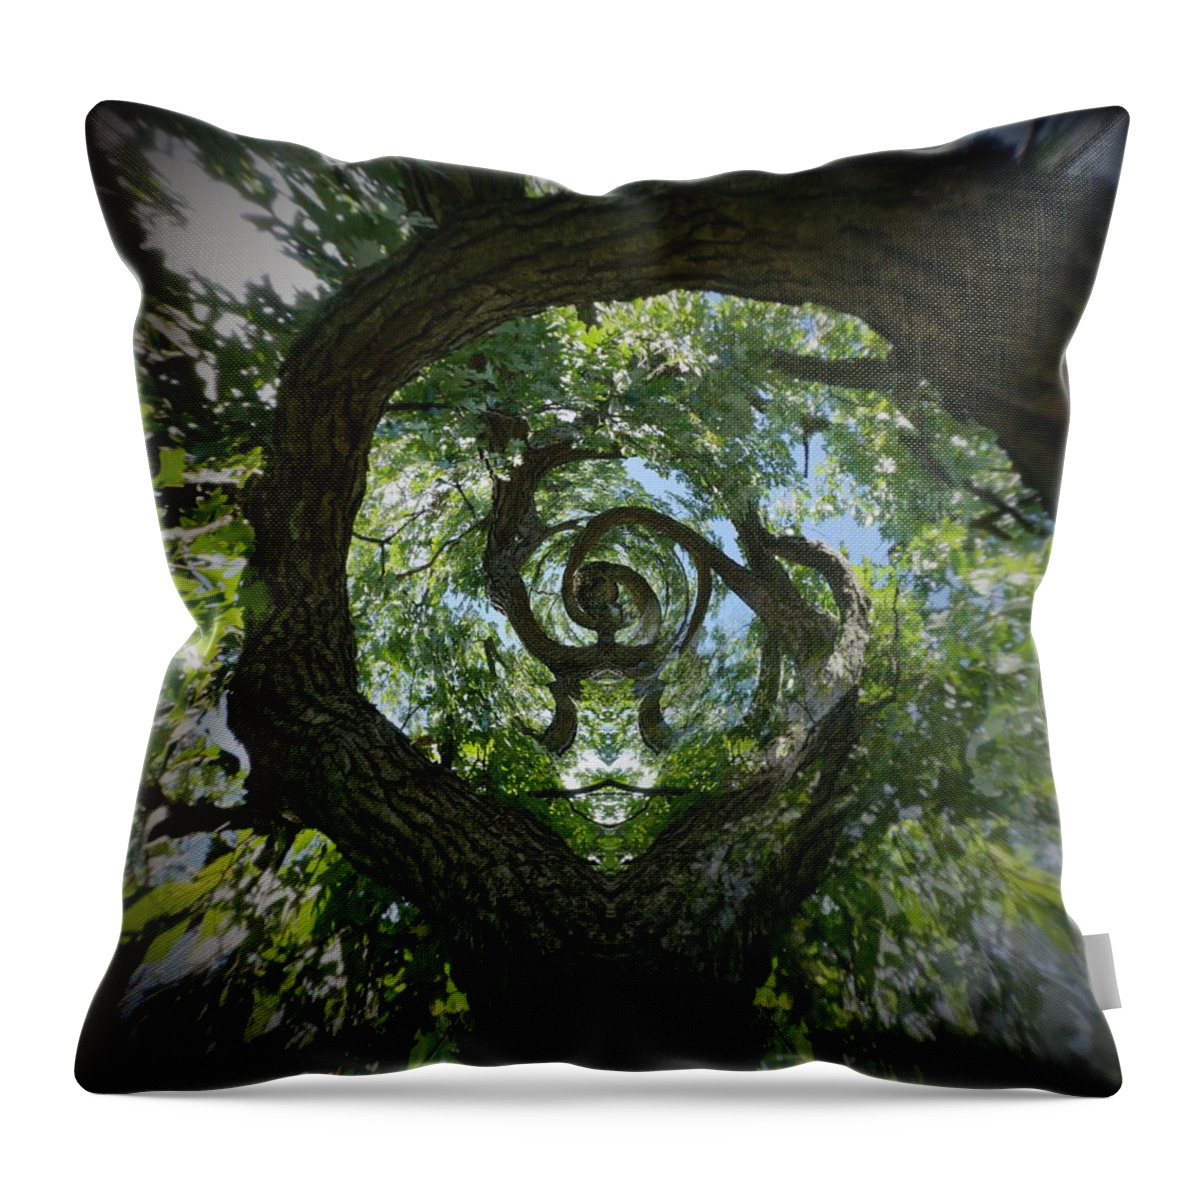 Abstract Throw Pillow featuring the photograph Twisted tree by Silvia Marcoschamer